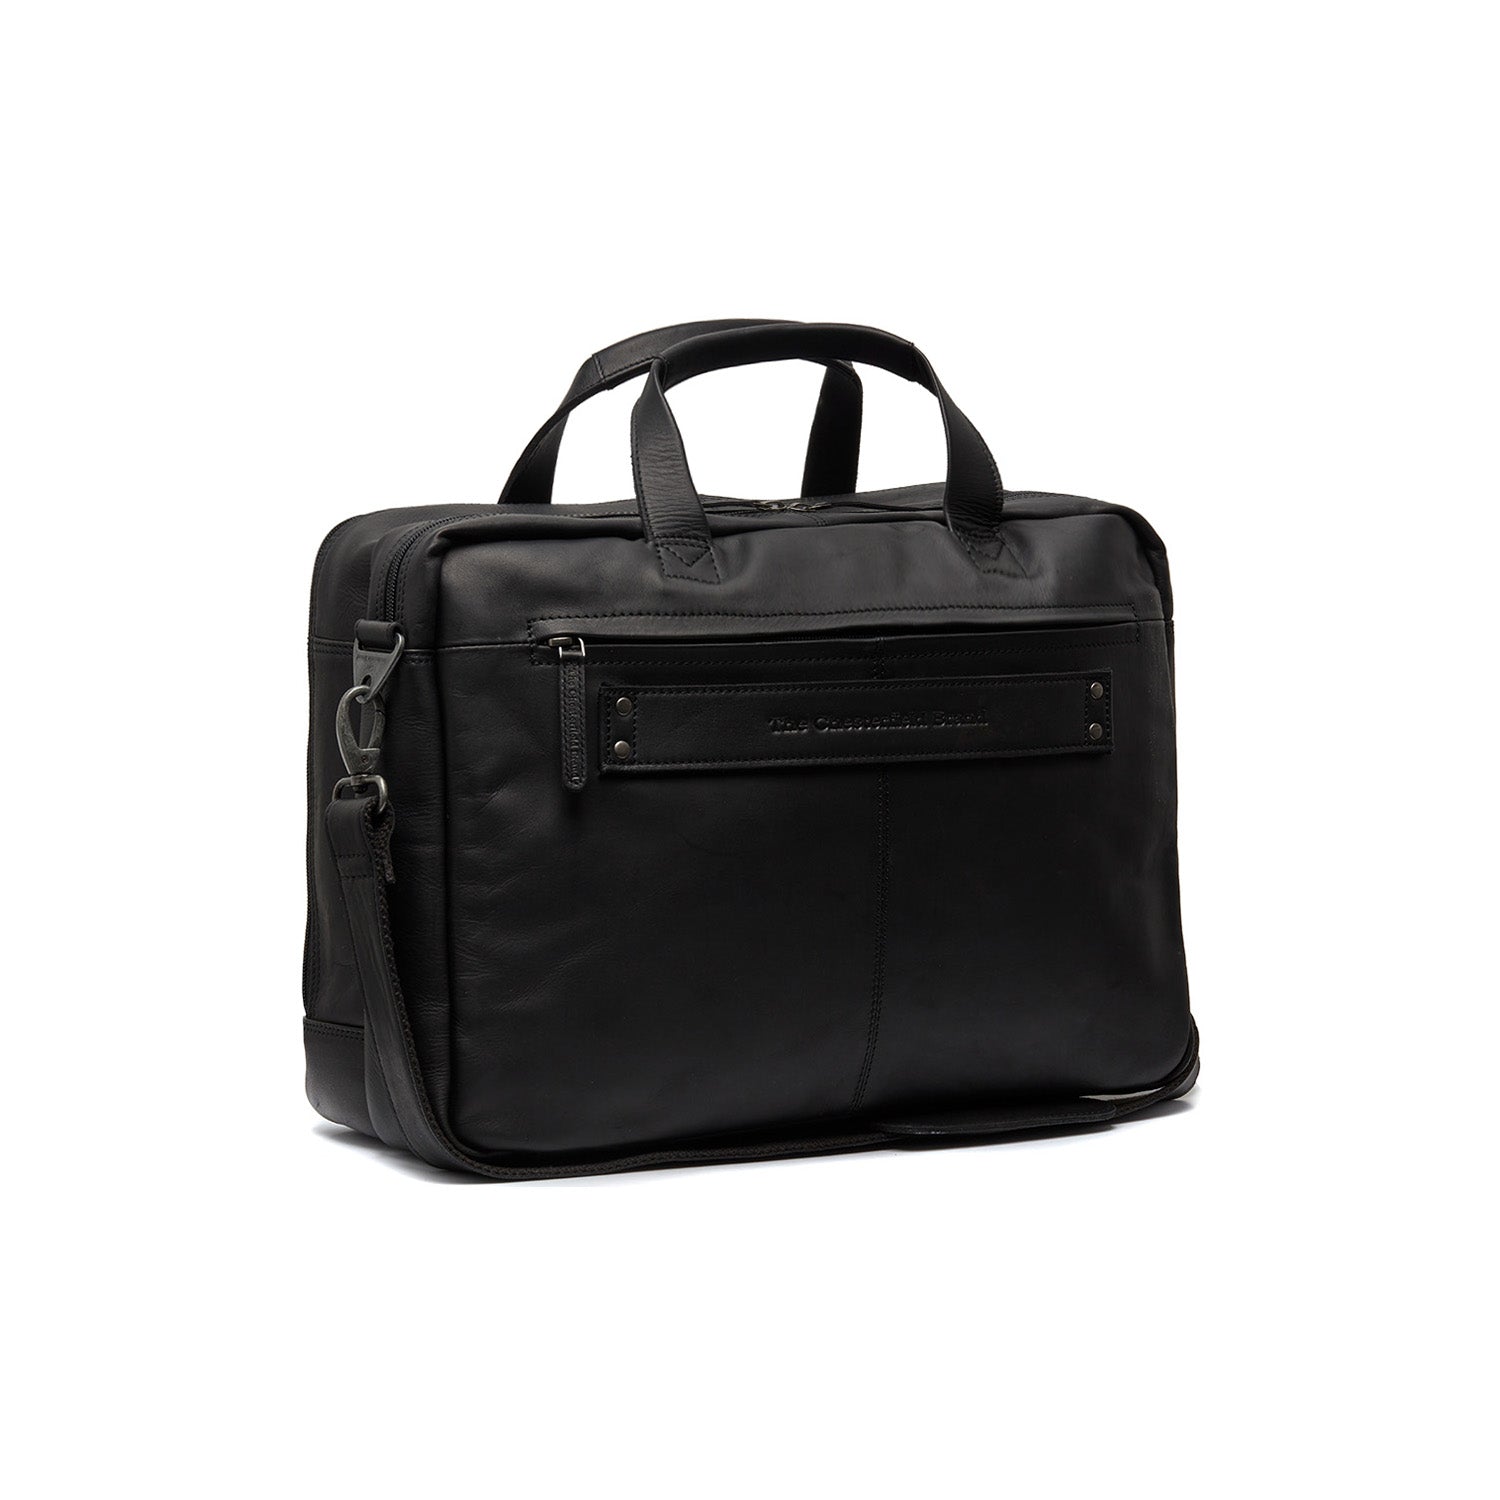 Leather Laptop Bag - The Chesterfield Brand Ryan Black